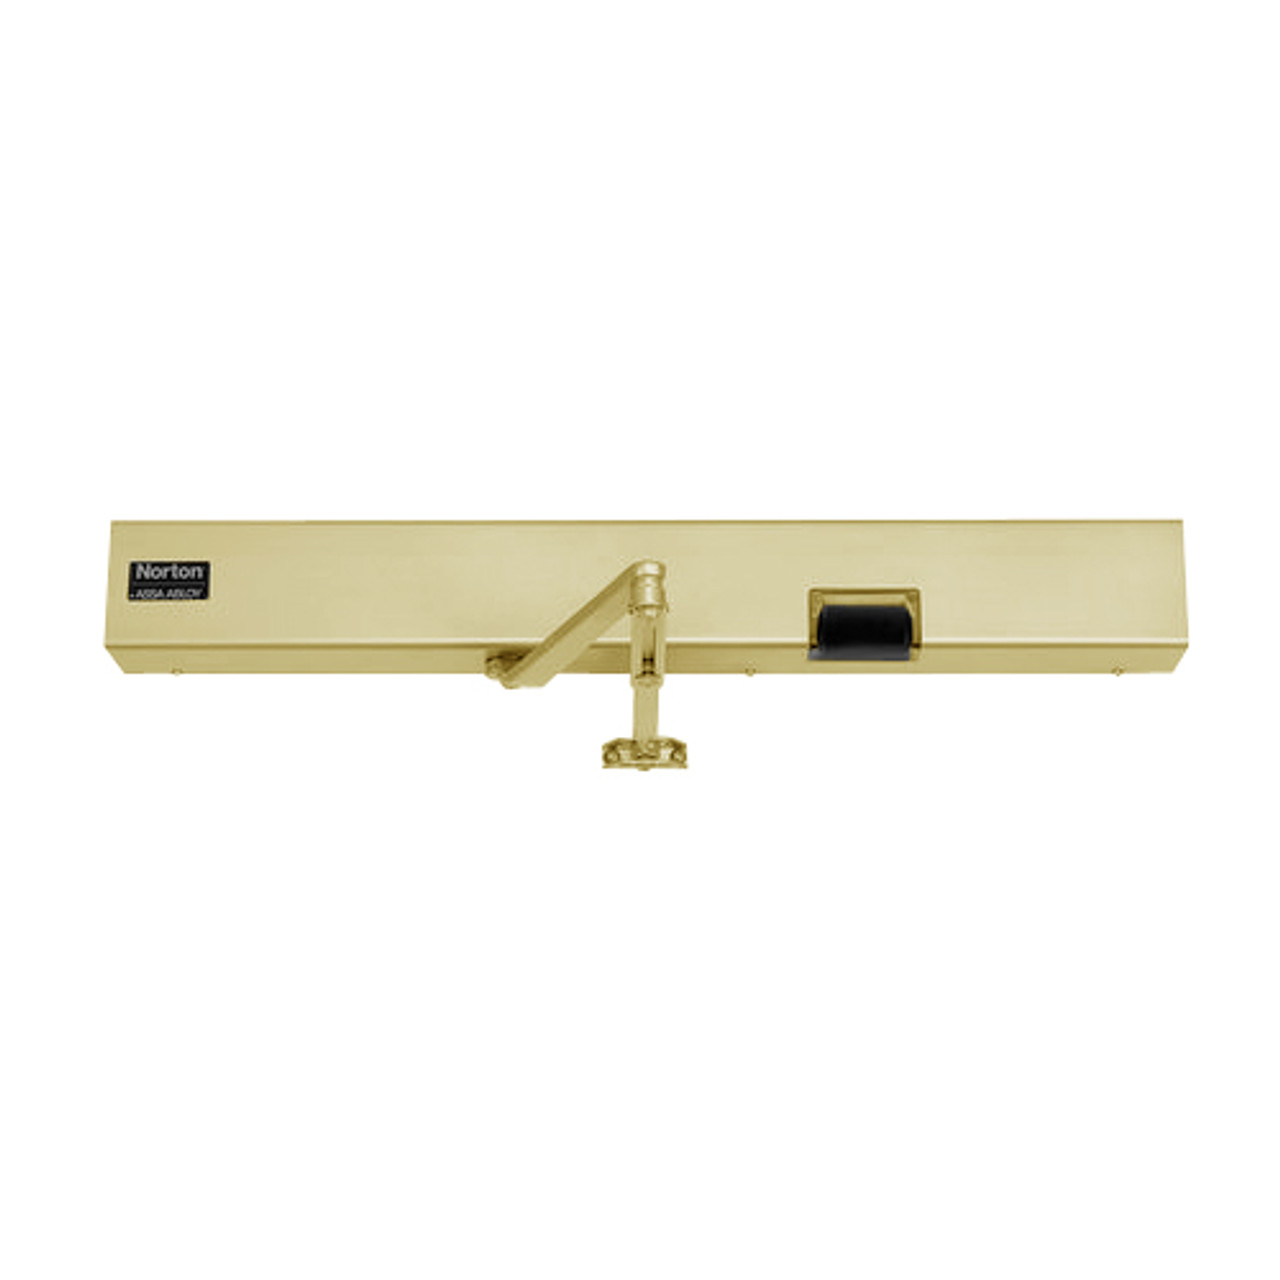 7123SZ-DZ-LH-120VAC-696 Norton 7100SZ Series Safe Zone Multi-Point Closer/Holder with Motion Sensor and Push Side Double Lever 11 inch Main Arm in Gold Finish